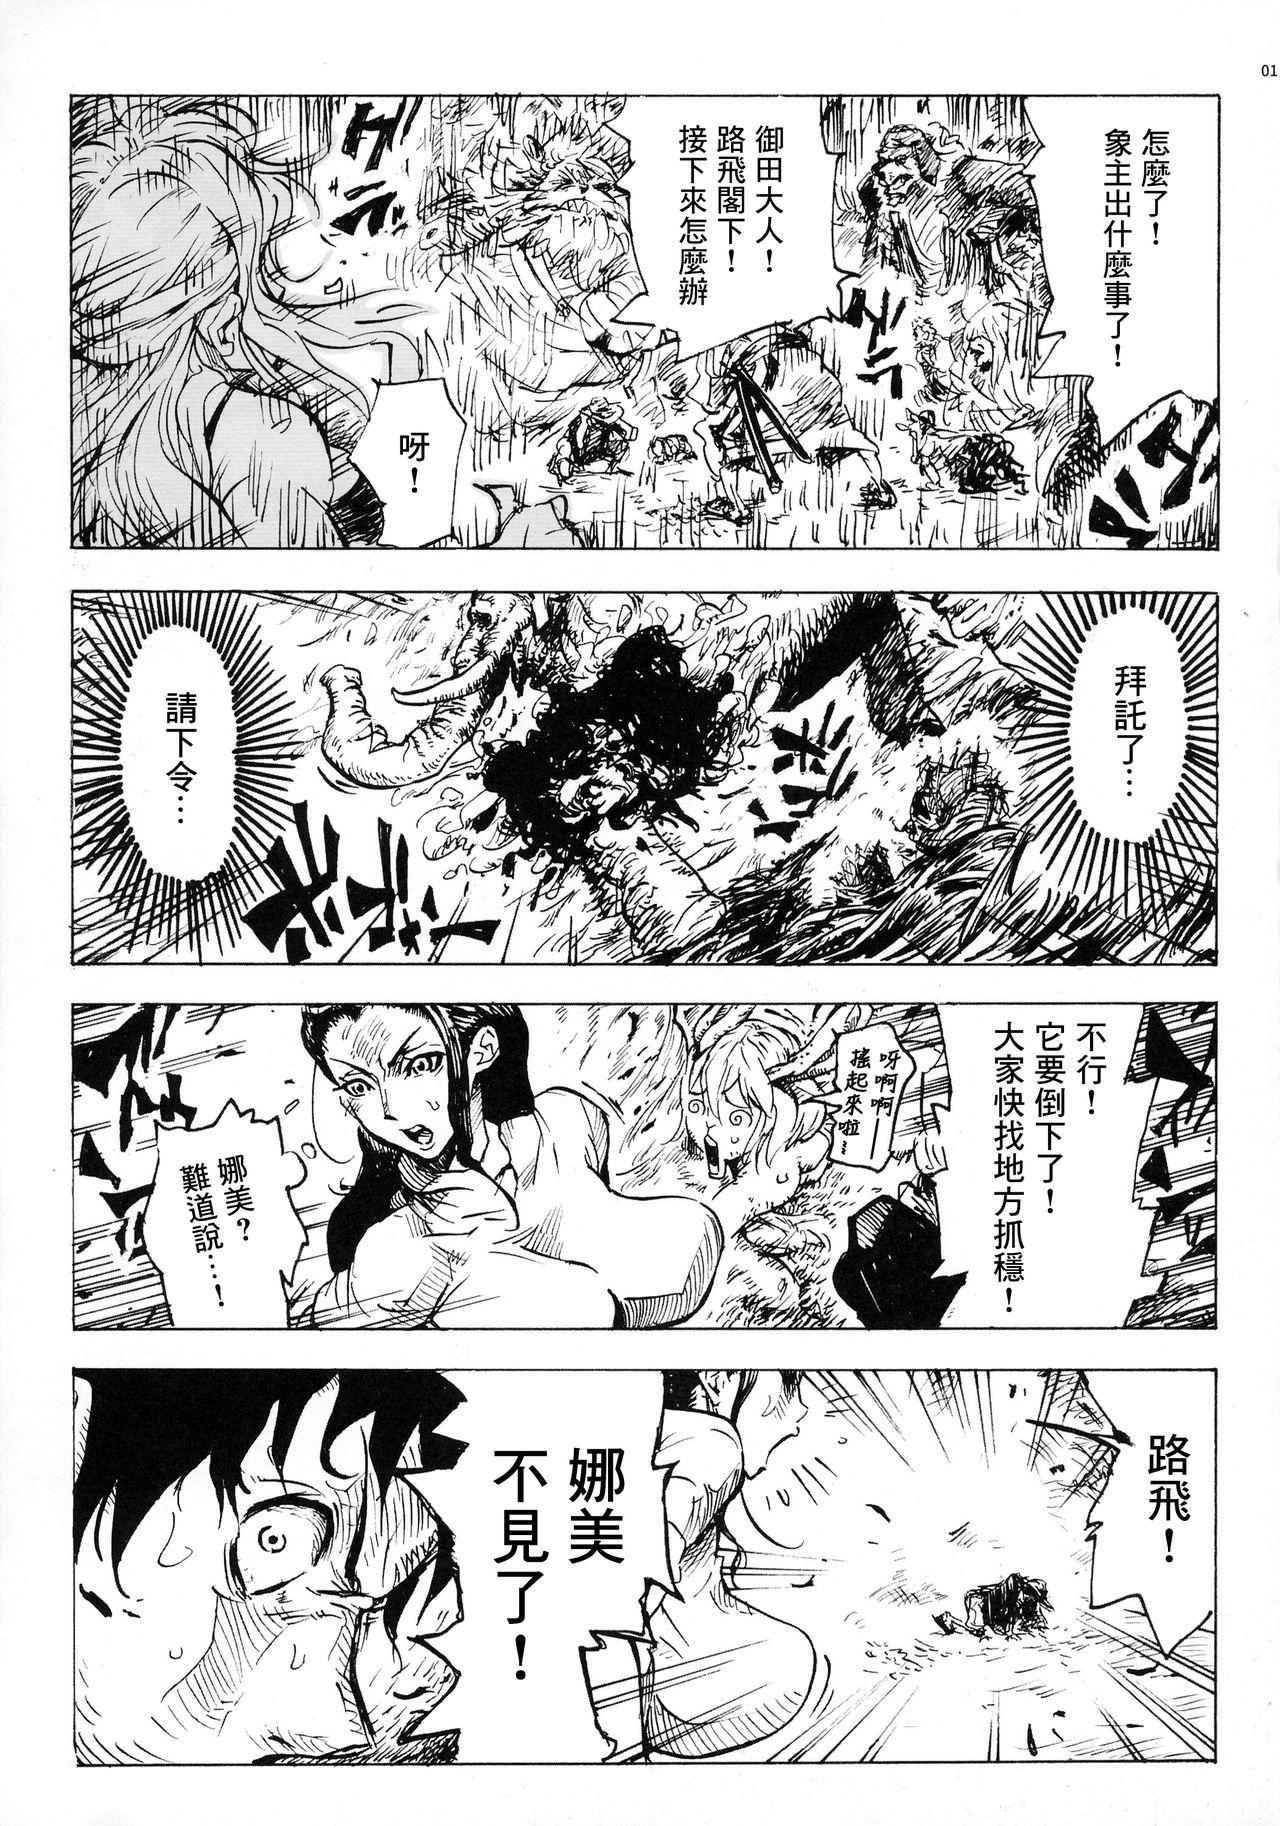 Fucked Hard P.O.M Another Episode "J.A.C.K" - One piece Nice - Page 4